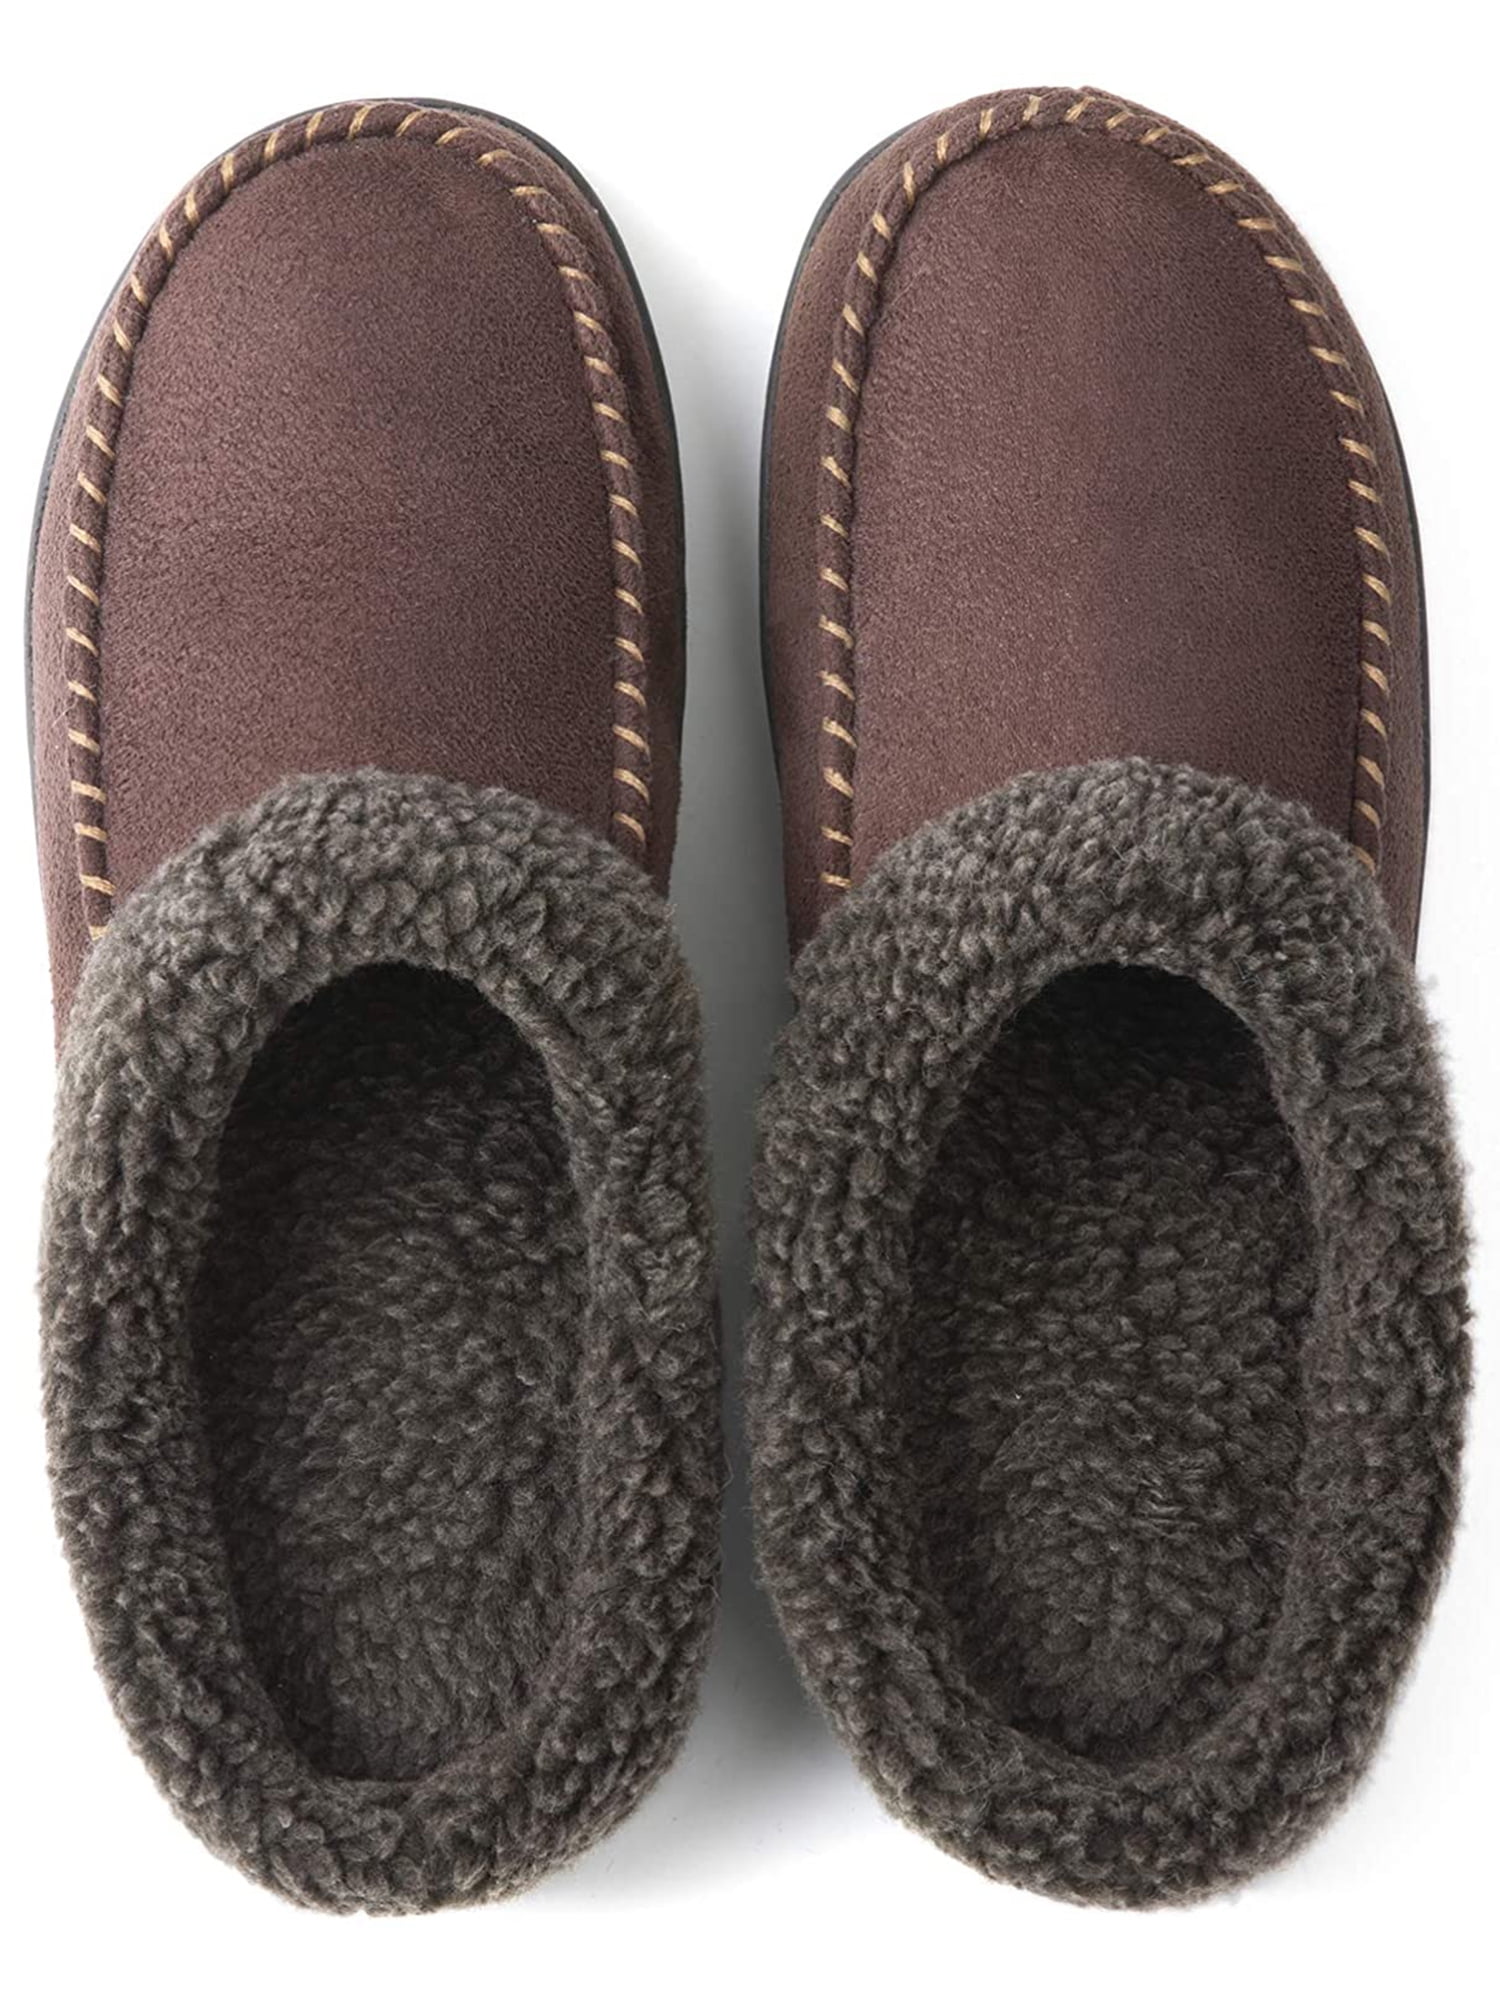 VLLy Mens Slippers Moccasins with Plush Lined Cozy House Bedroom Shoes for Men 